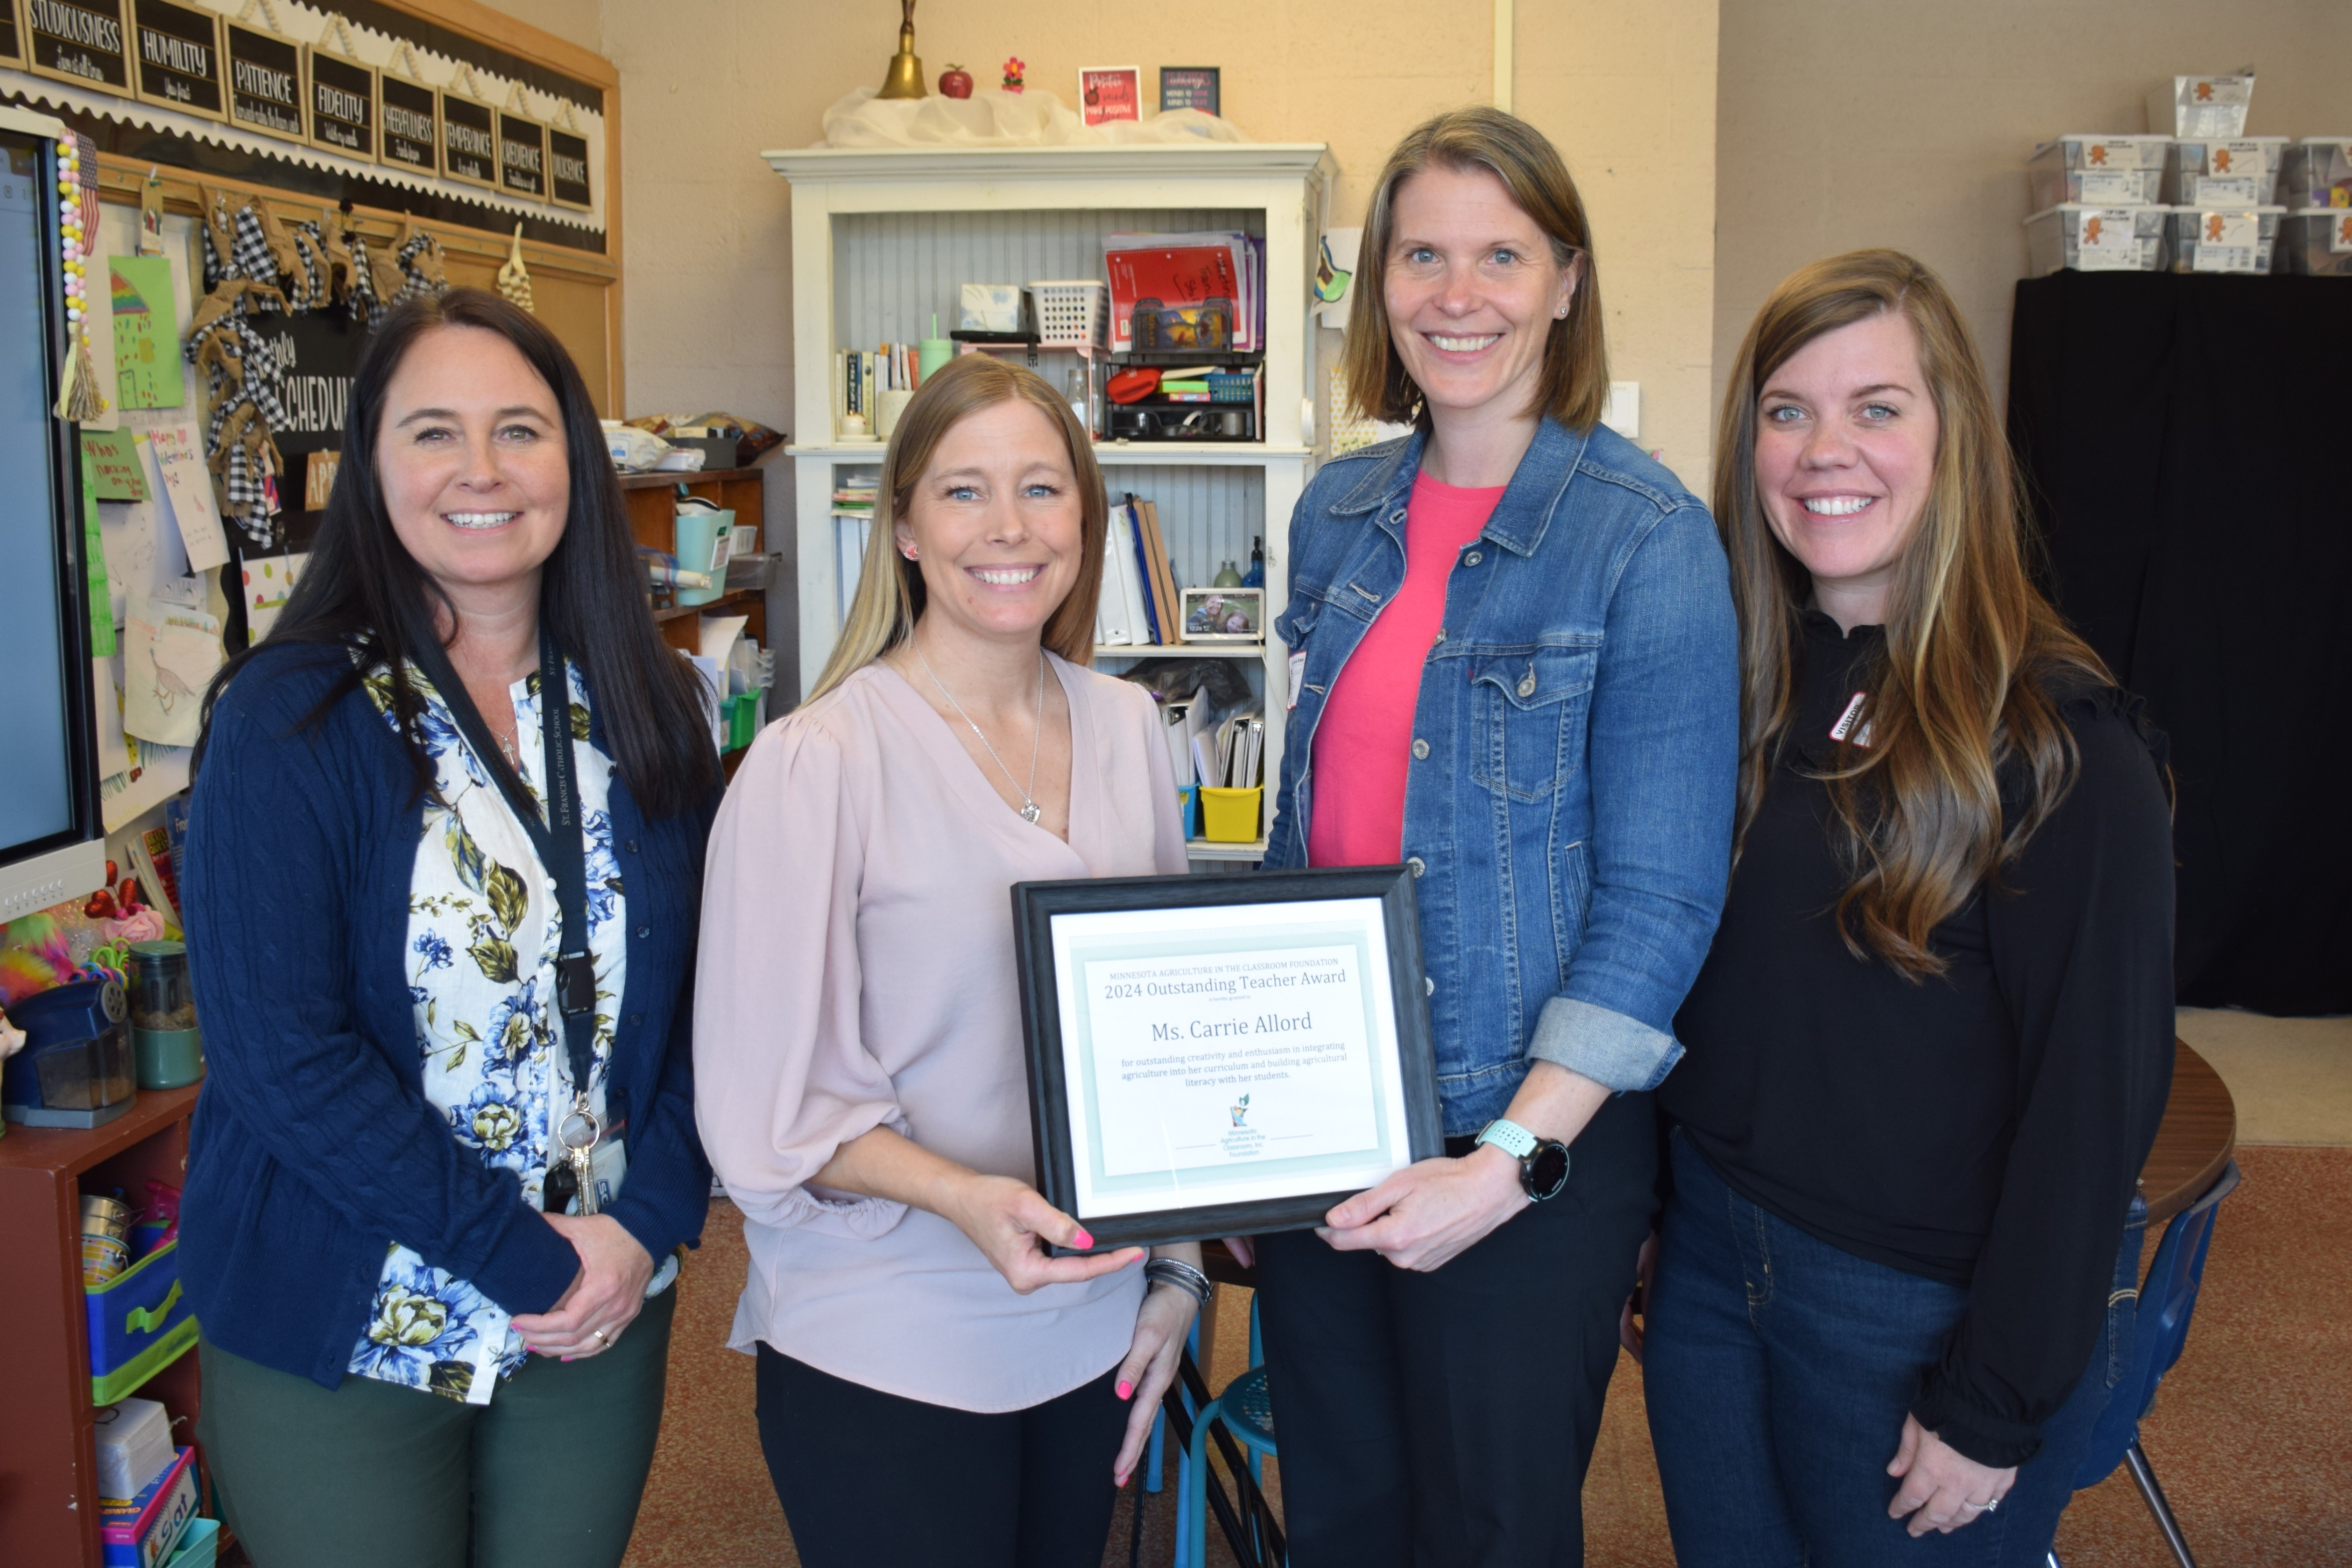 Carrie Allord receives the 2024 MAITC Outstanding Teacher Award from MAITC staff members.